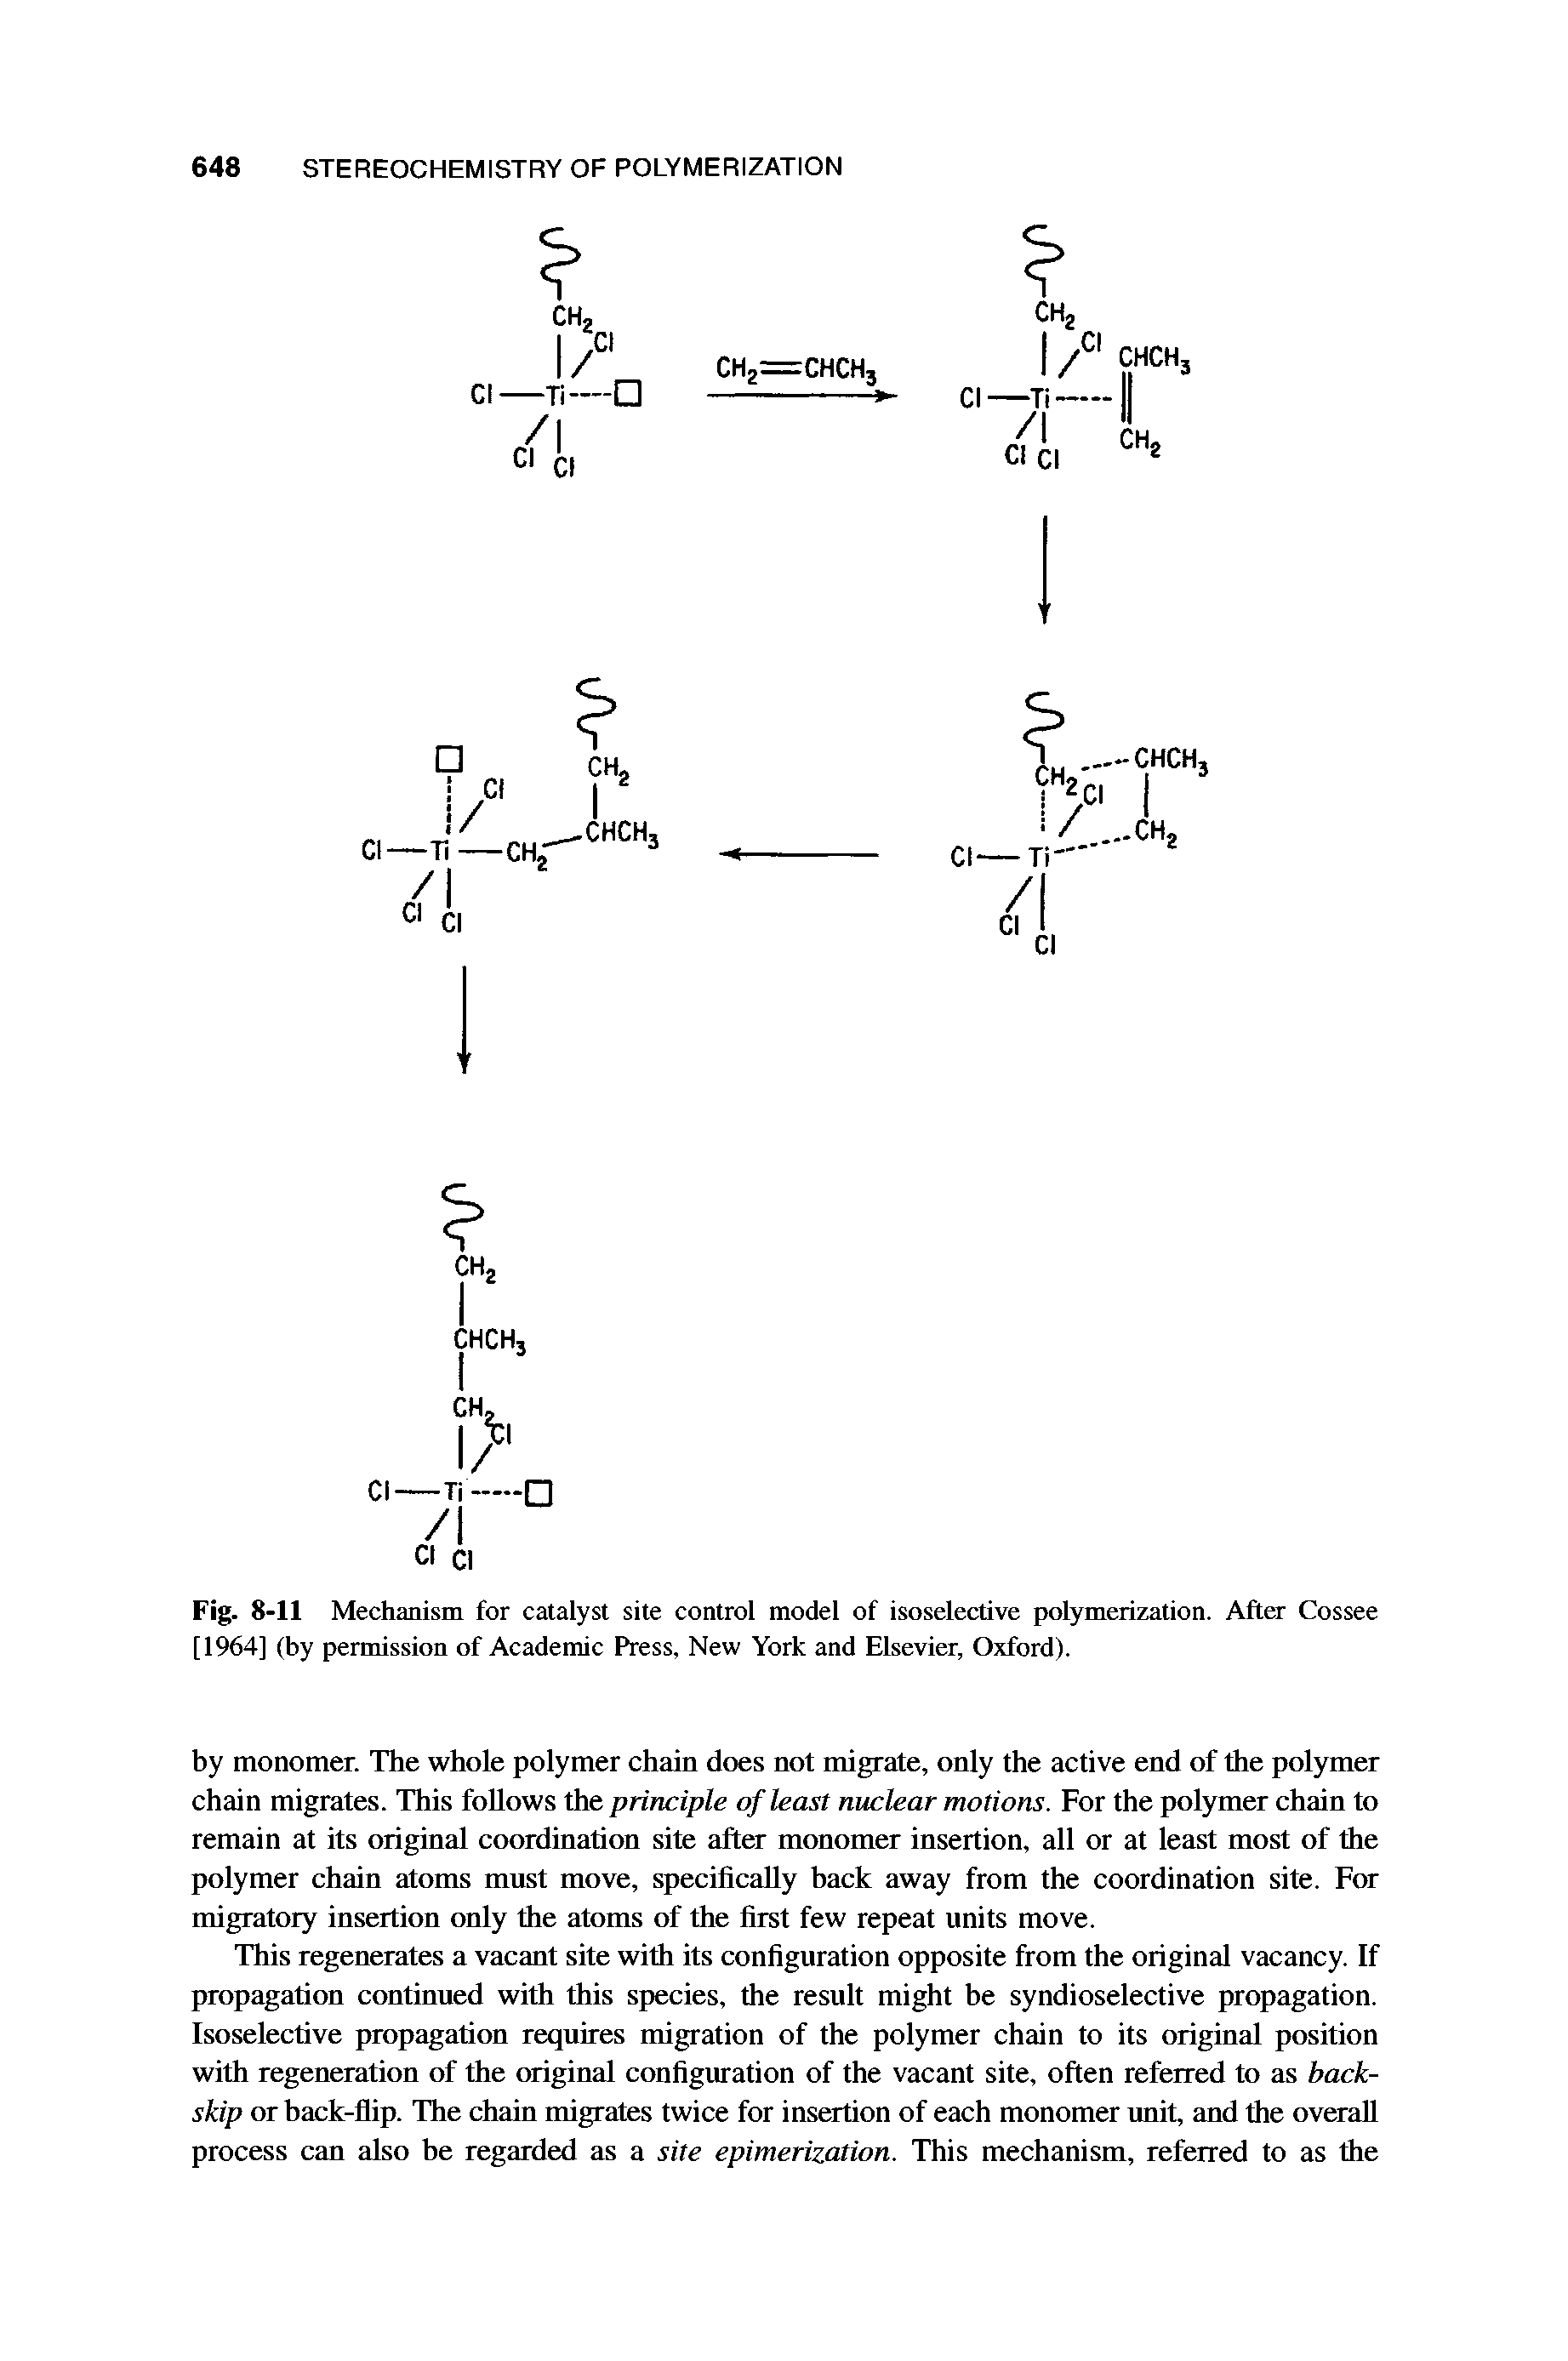 Fig. 8-11 Mechanism for catalyst site control model of isoselective polymerization. After Cossee [1964] (by permission of Academic Press, New York and Elsevier, Oxford).